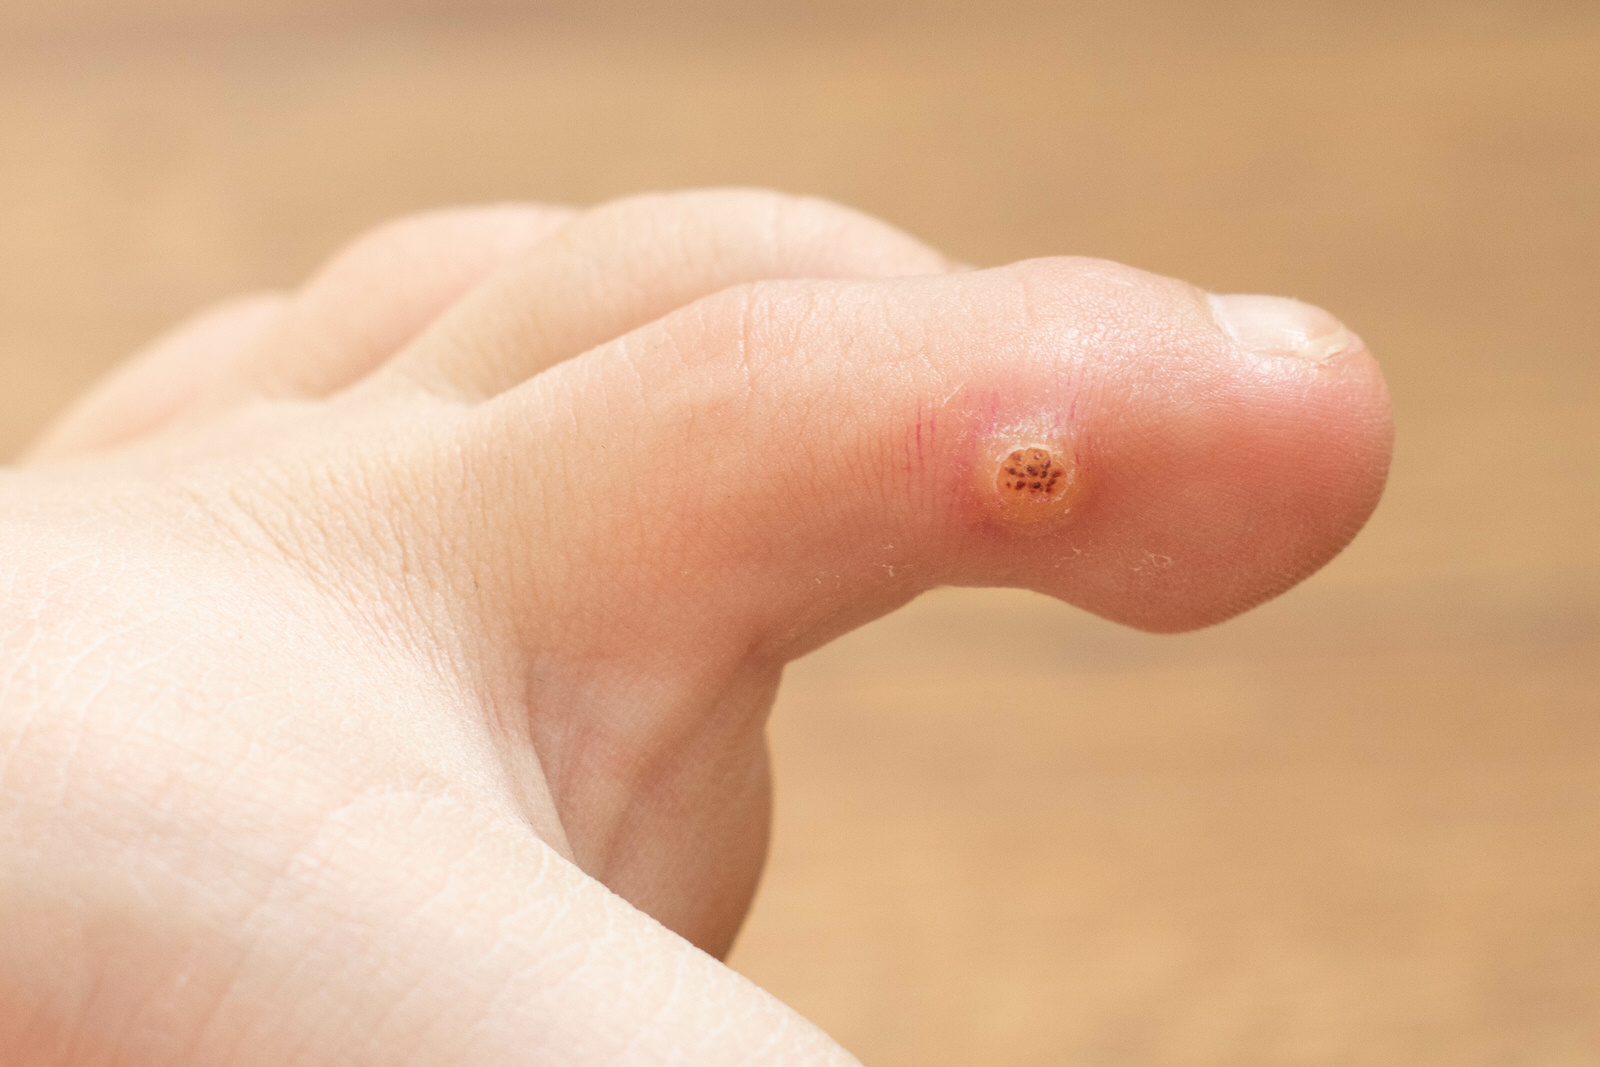 Hpv and warts on hand Warts on hands hpv virus